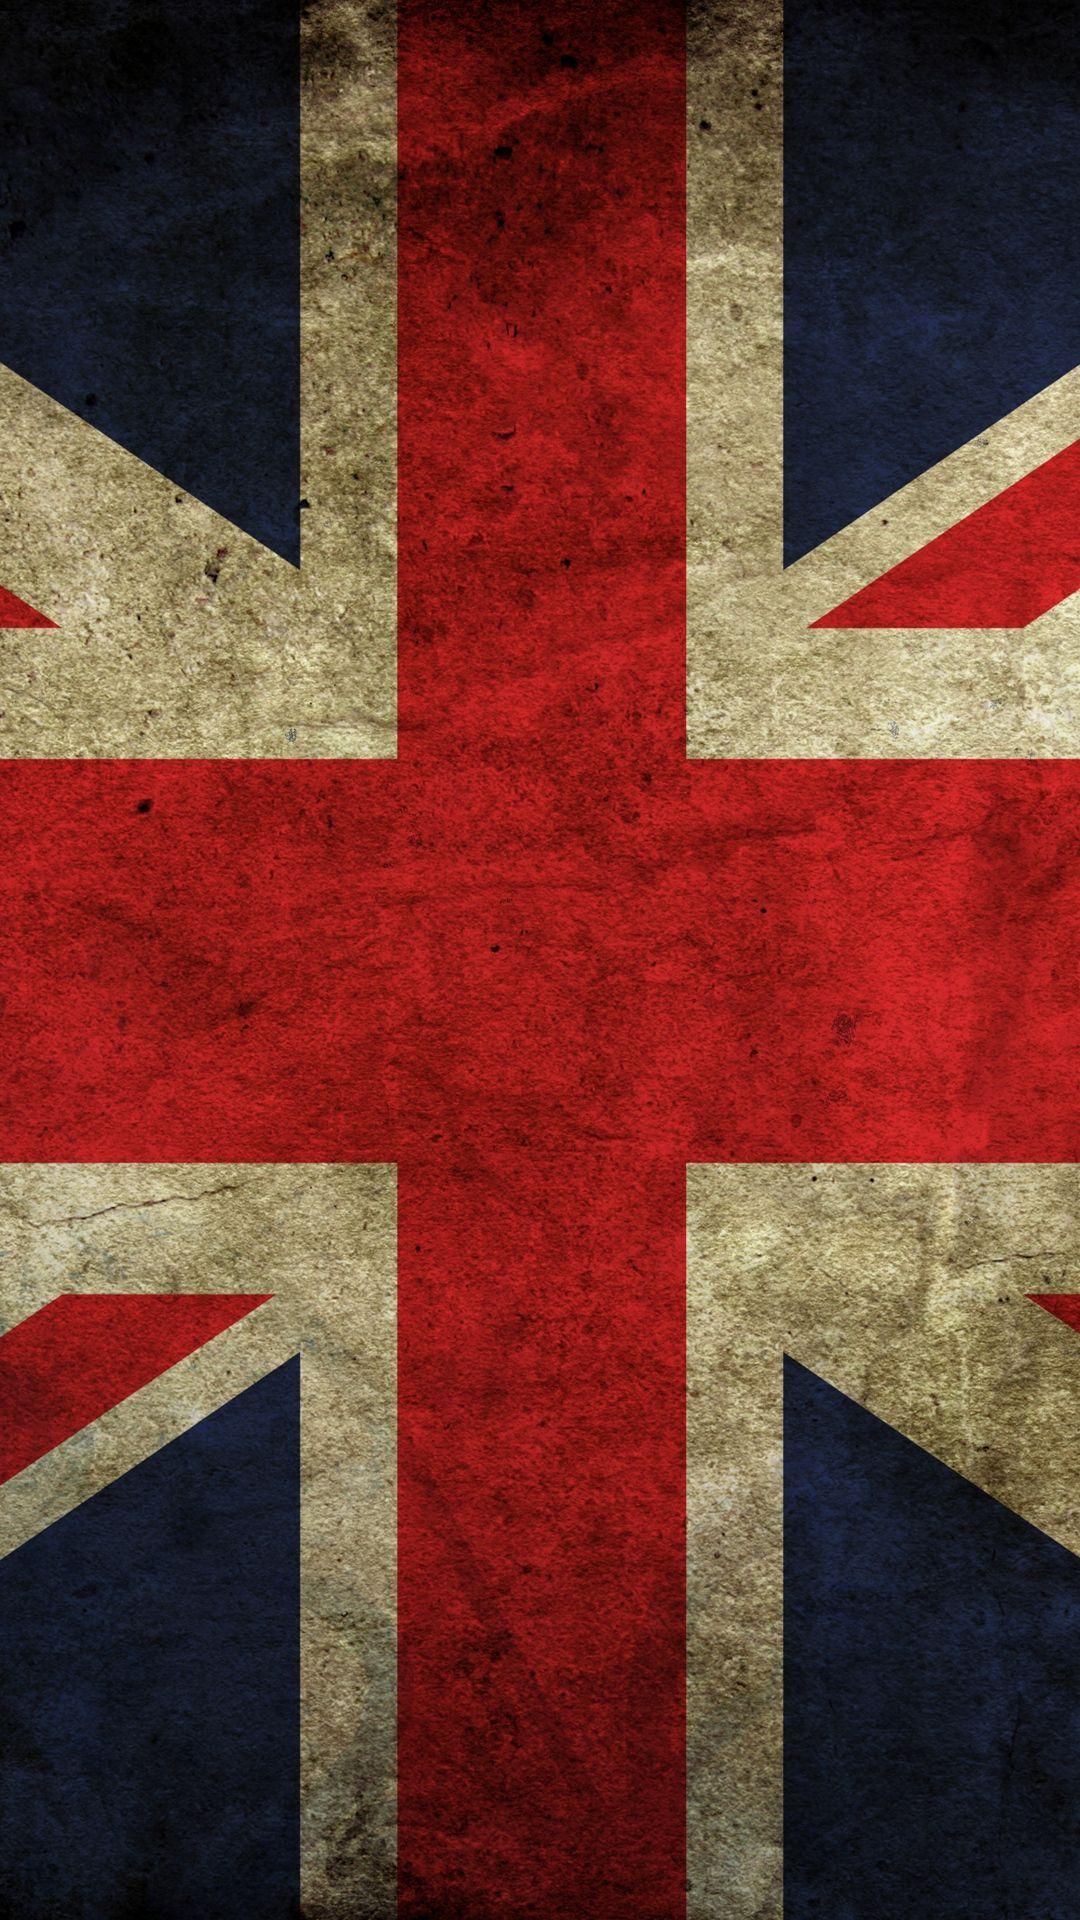 Grungy vintage British Flag iPhone 6 Wallpaper. Tap to see more